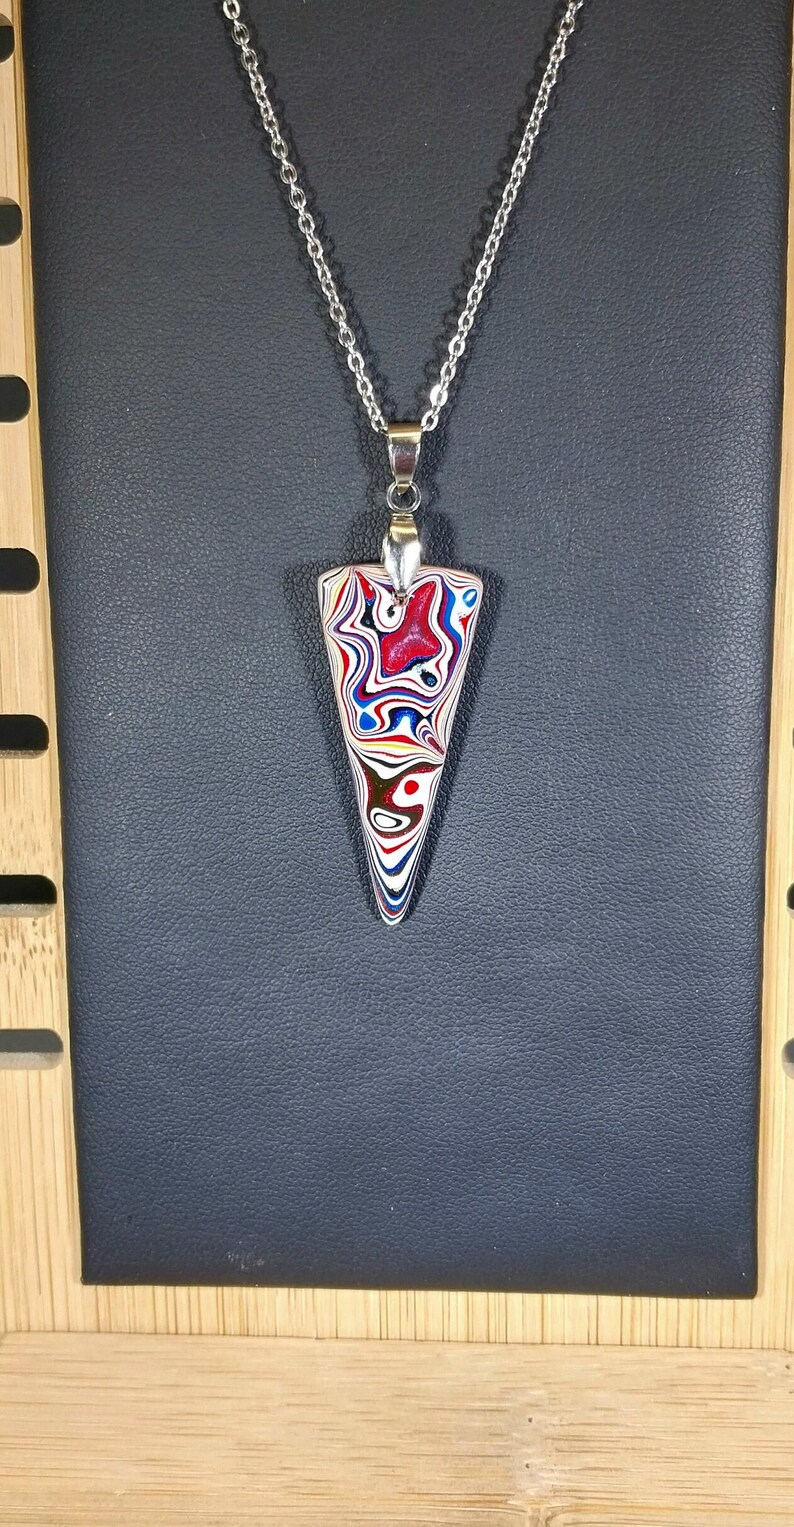 Fordite Necklace in Big Rig Fordite Inverted Triangle Shape is Reversible with Great Colors Chain Included image 2